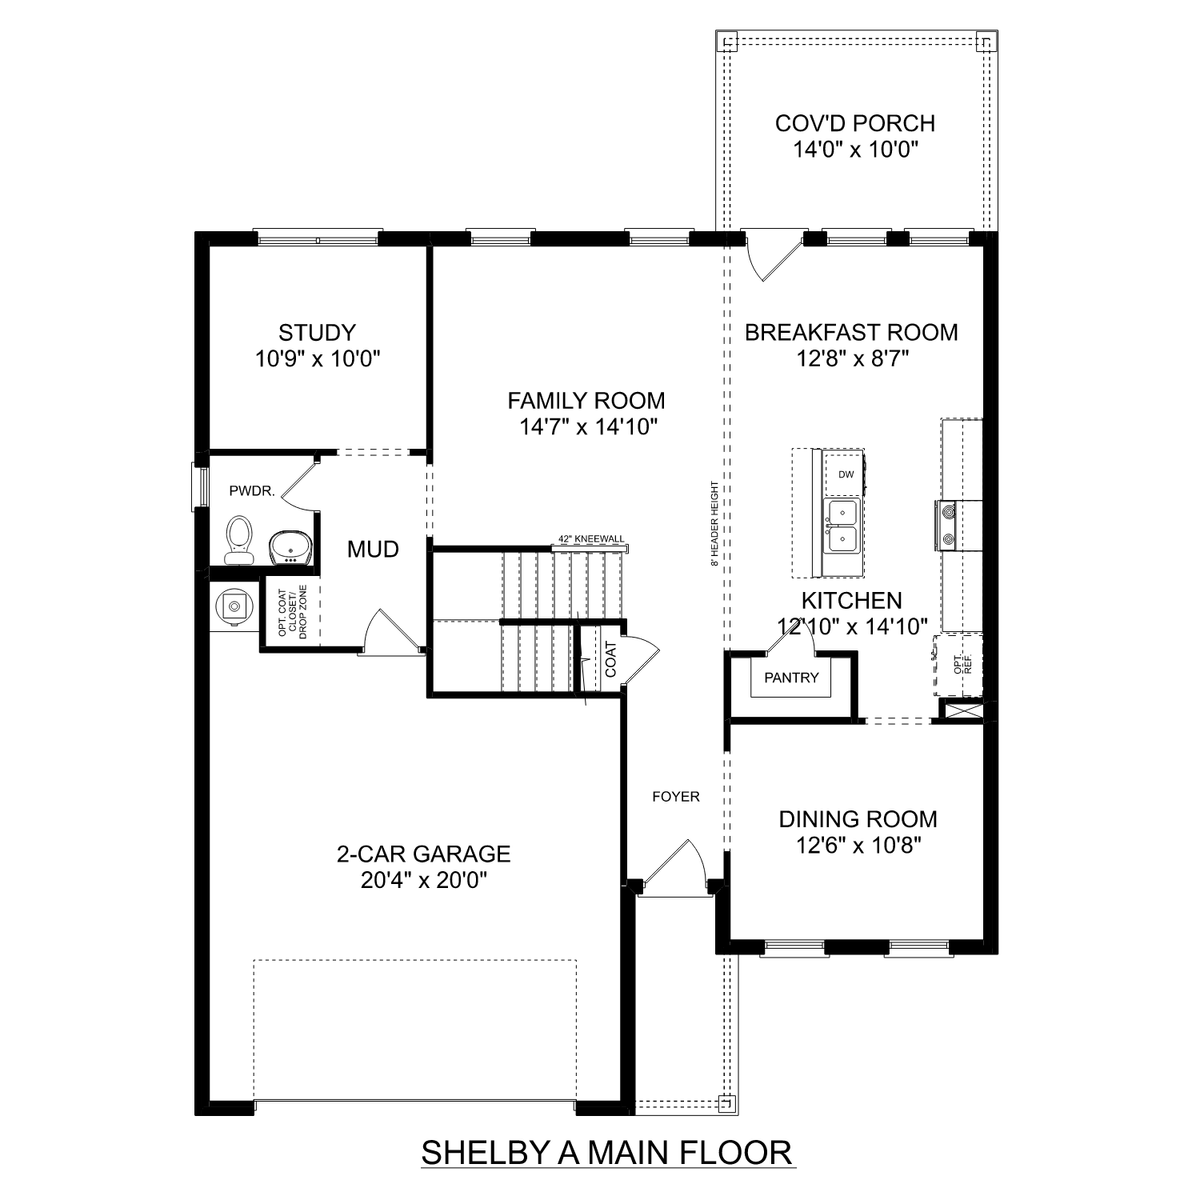 1 - The Shelby A buildable floor plan layout in Davidson Homes' Creek Grove community.